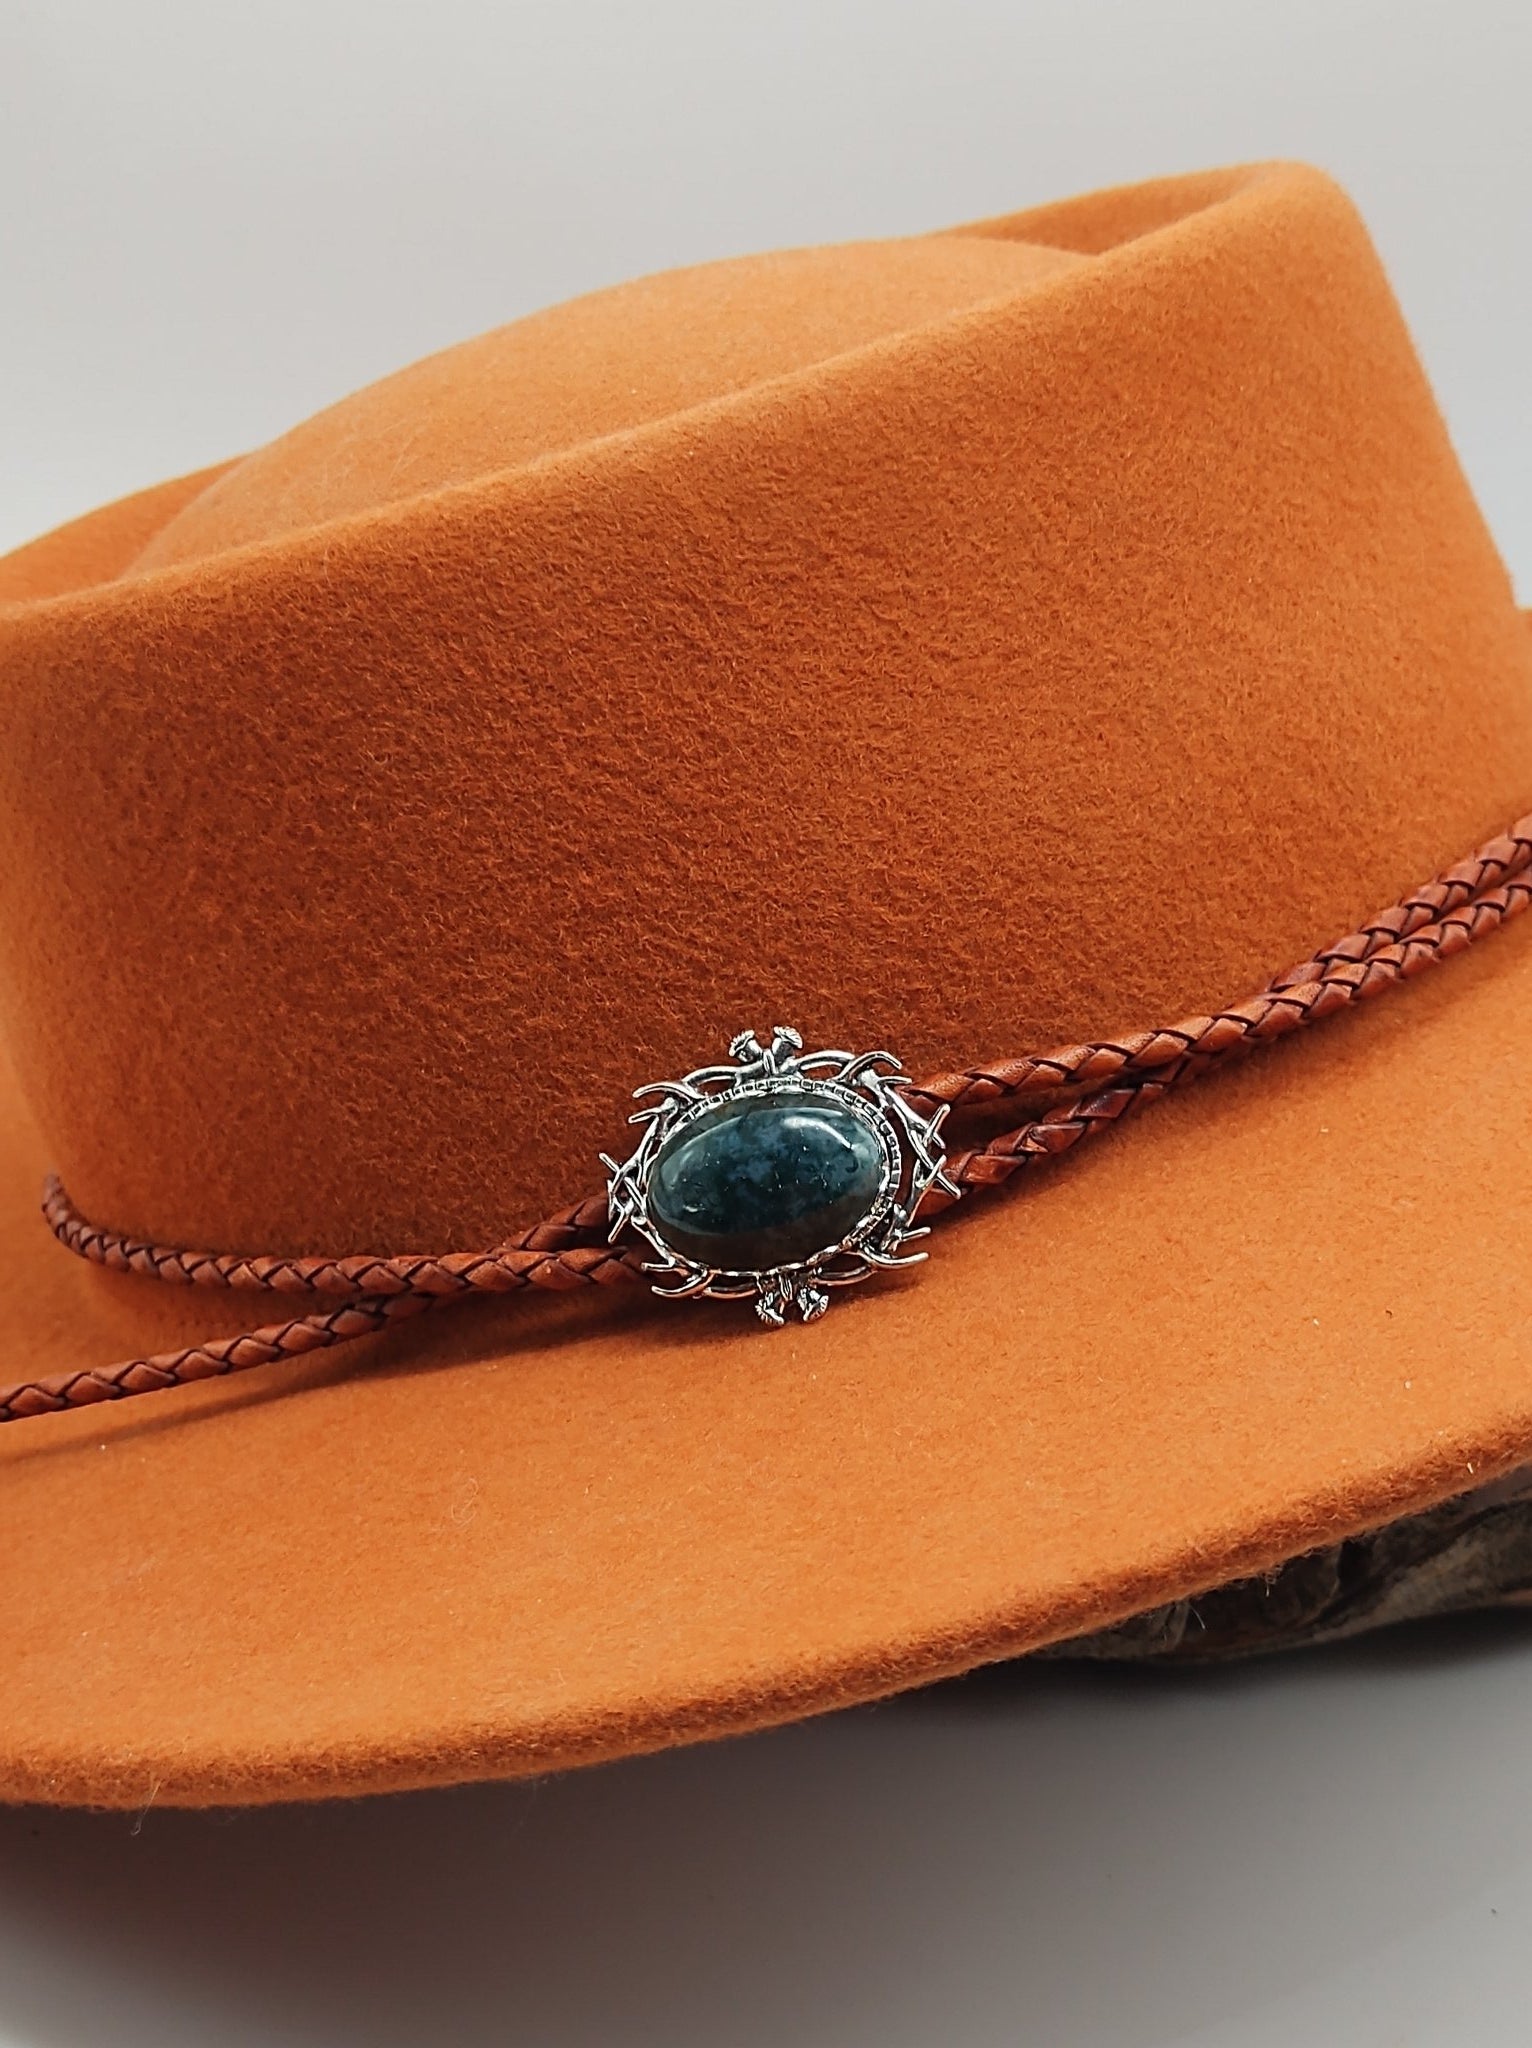 Stag Horn Cowboy Hat Band with Green Moss Agate on Leather - Folks On The Edge